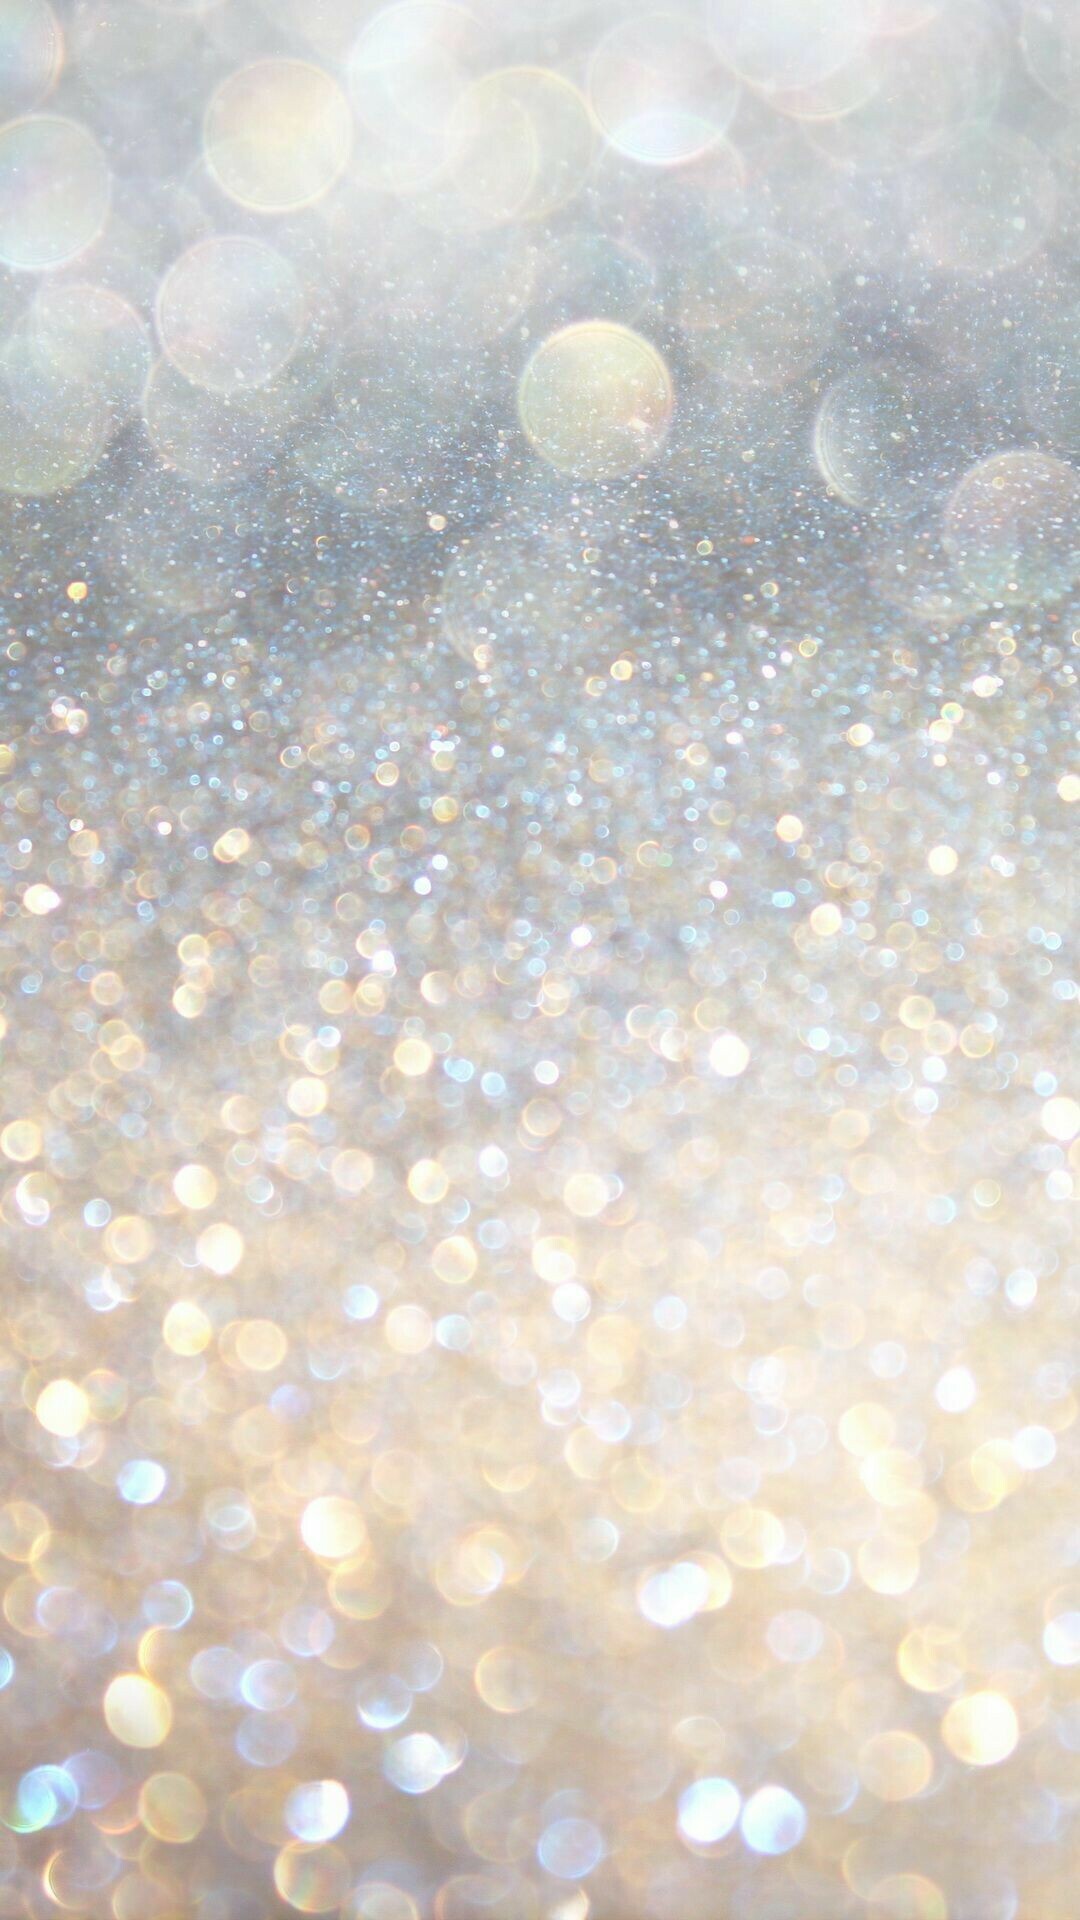 Sparkle: Glitter, Has tendency to stick onto unwanted surfaces, including skin, hair, and clothes. 1080x1920 Full HD Wallpaper.